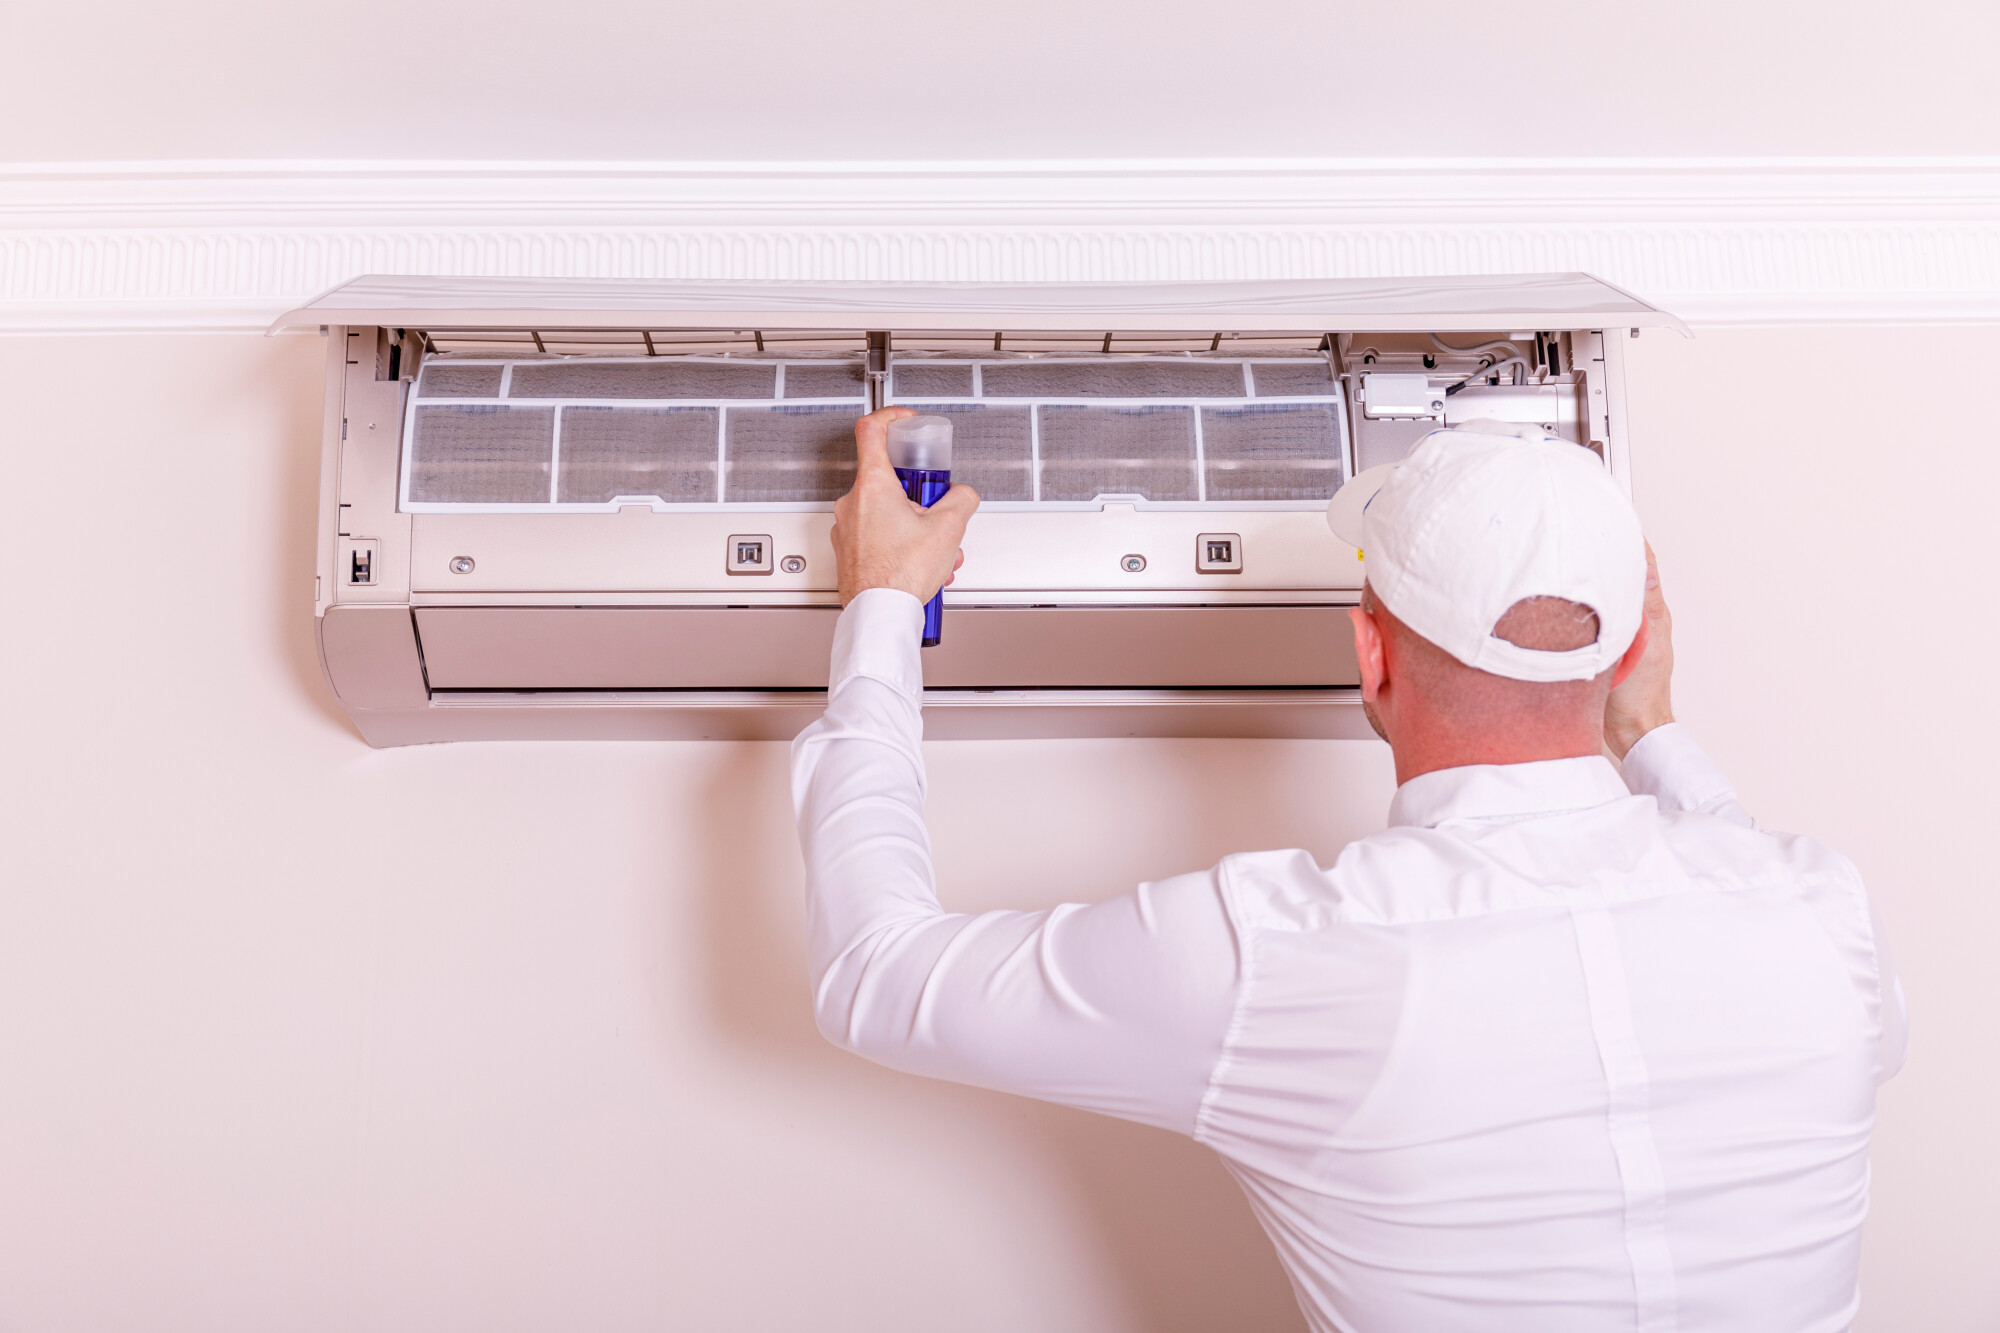 If you're shopping for a new HVAC system but not sure where to start, click here to explore different types of AC units.